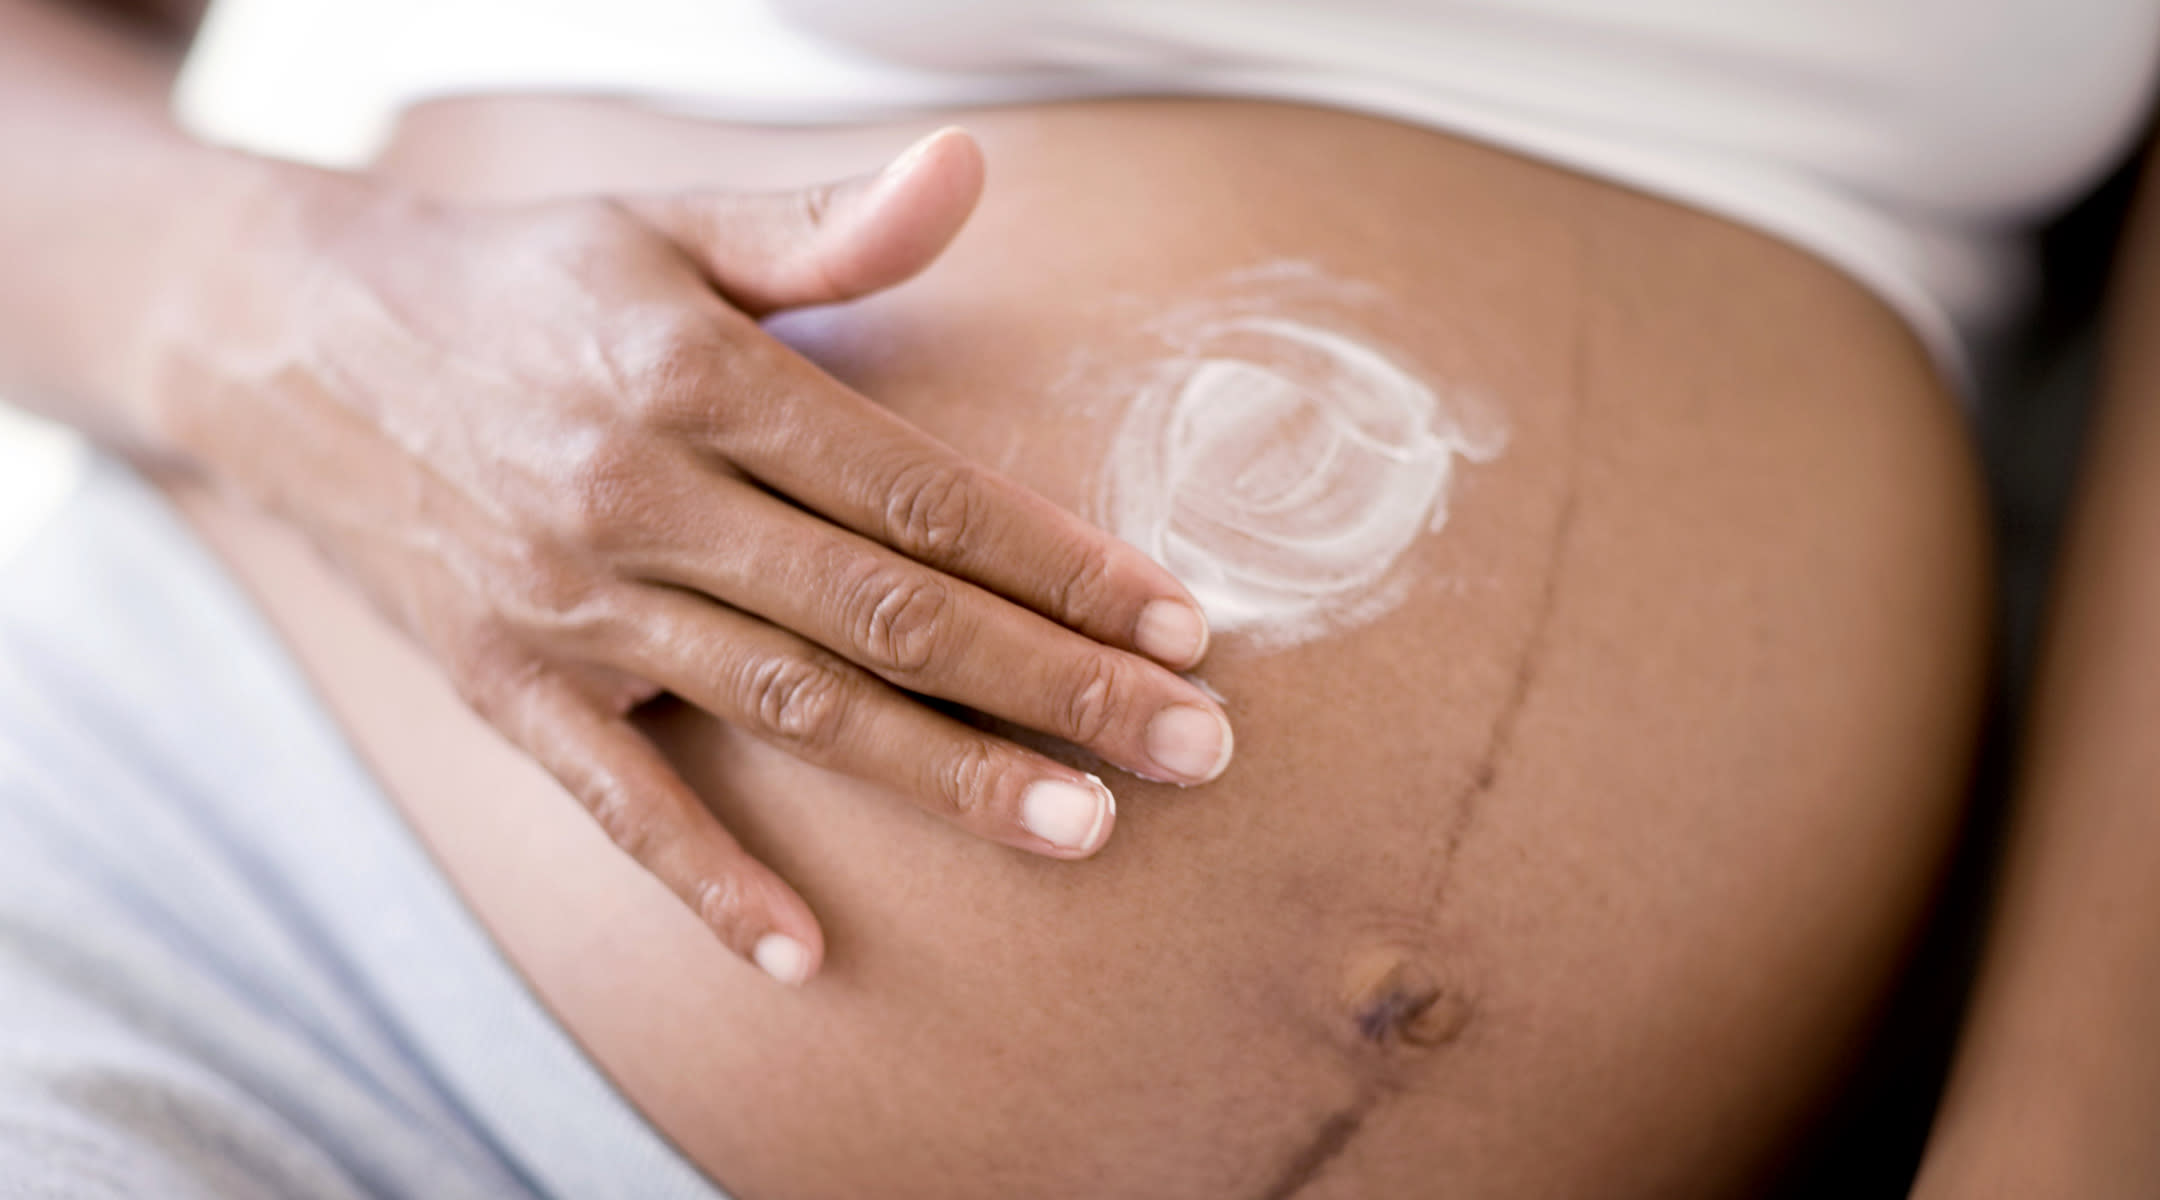 How To Avoid Stretch Markss During Pregnancy Home Remedies